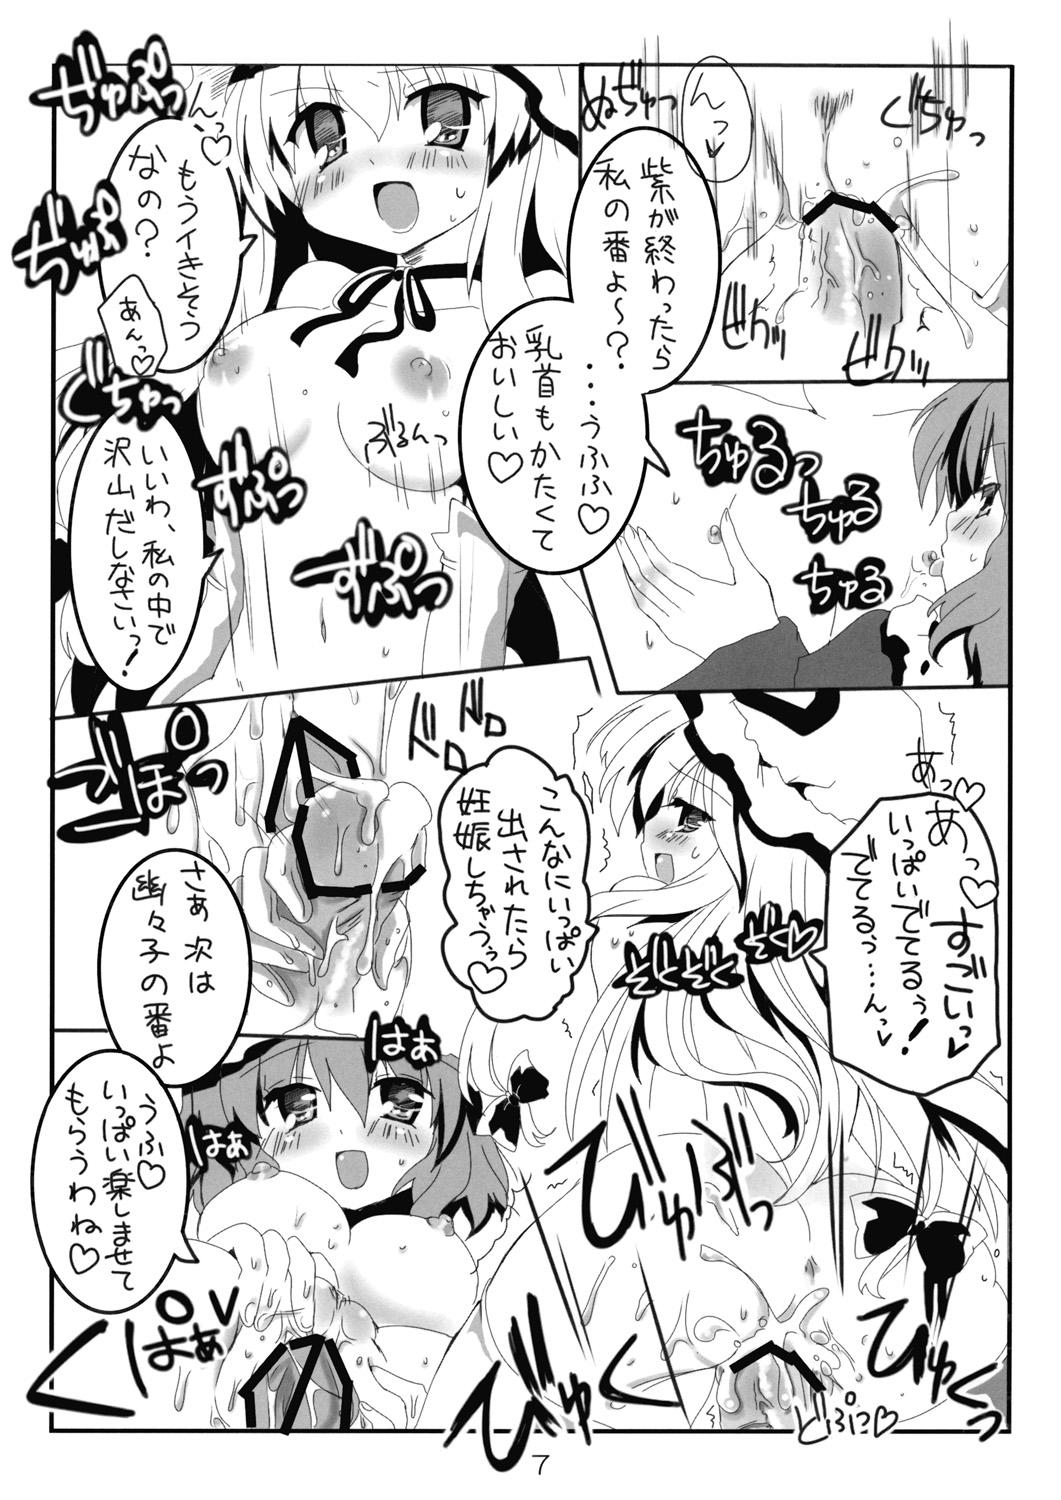 Gostosas Domination Magic - Touhou project Blowjob - Page 8